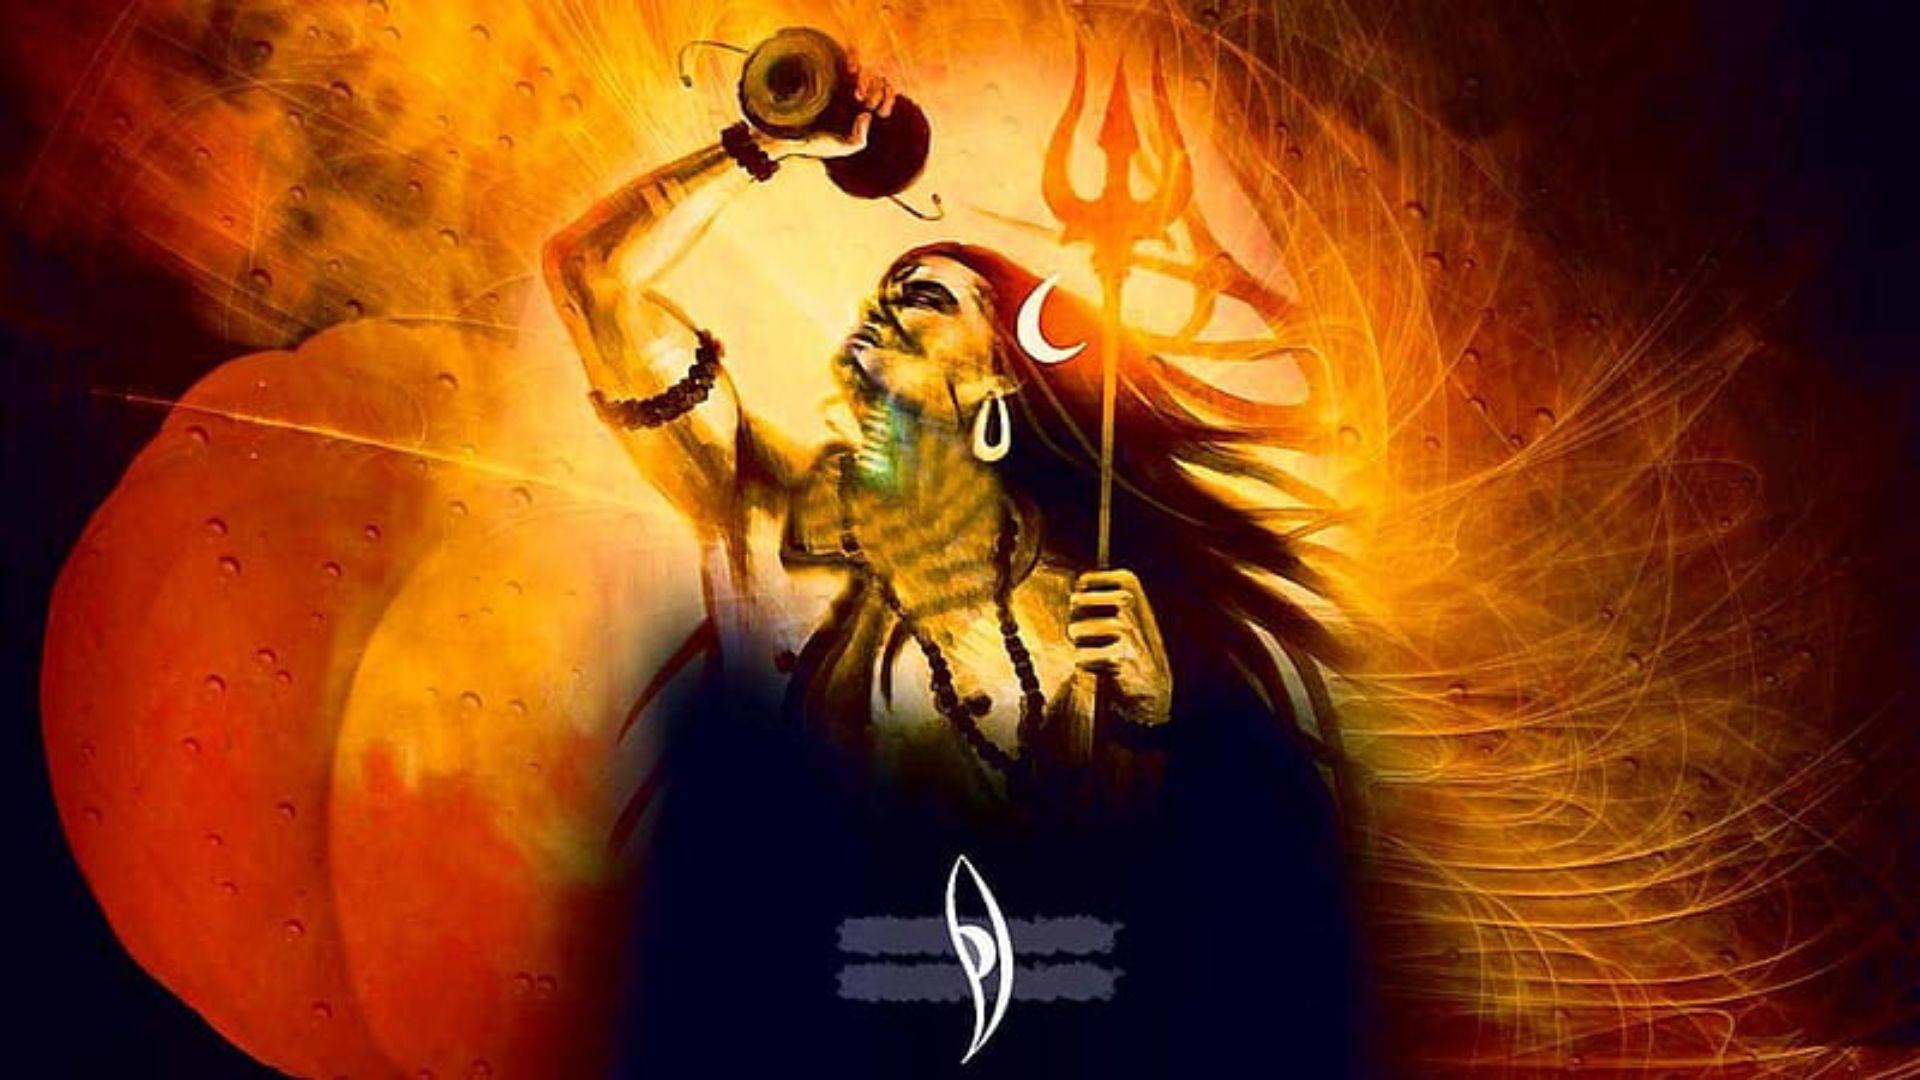 Lord shiva Wallpapers - Top 30 Best Lord shiva Wallpapers Download